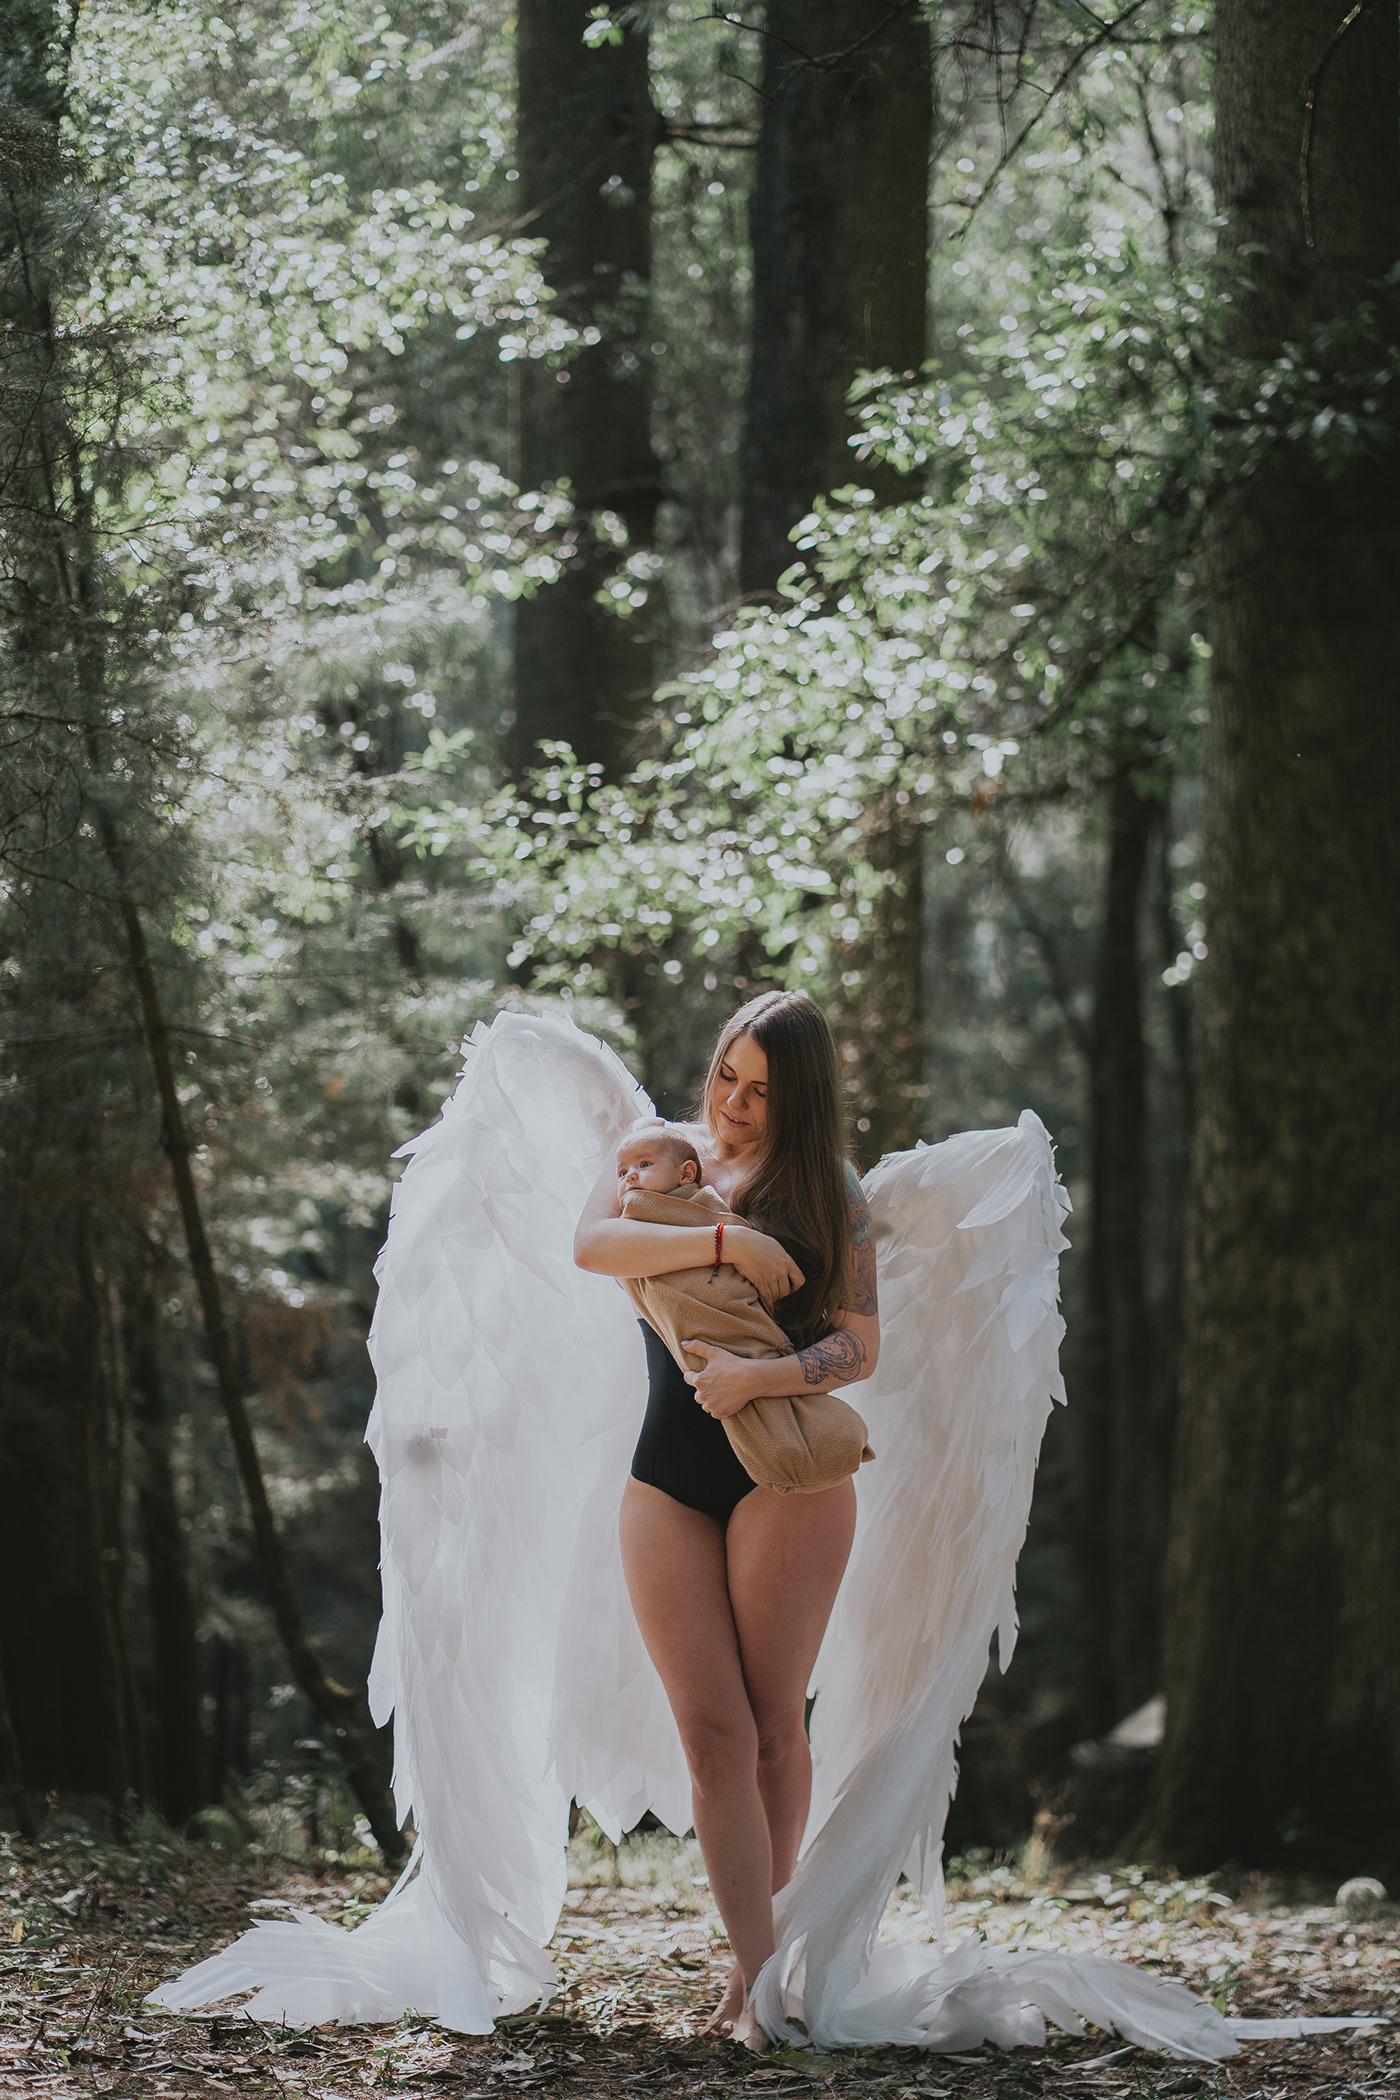 angel beauty maternity Nature newborn photography Outdoor Photography  portrait wings woman